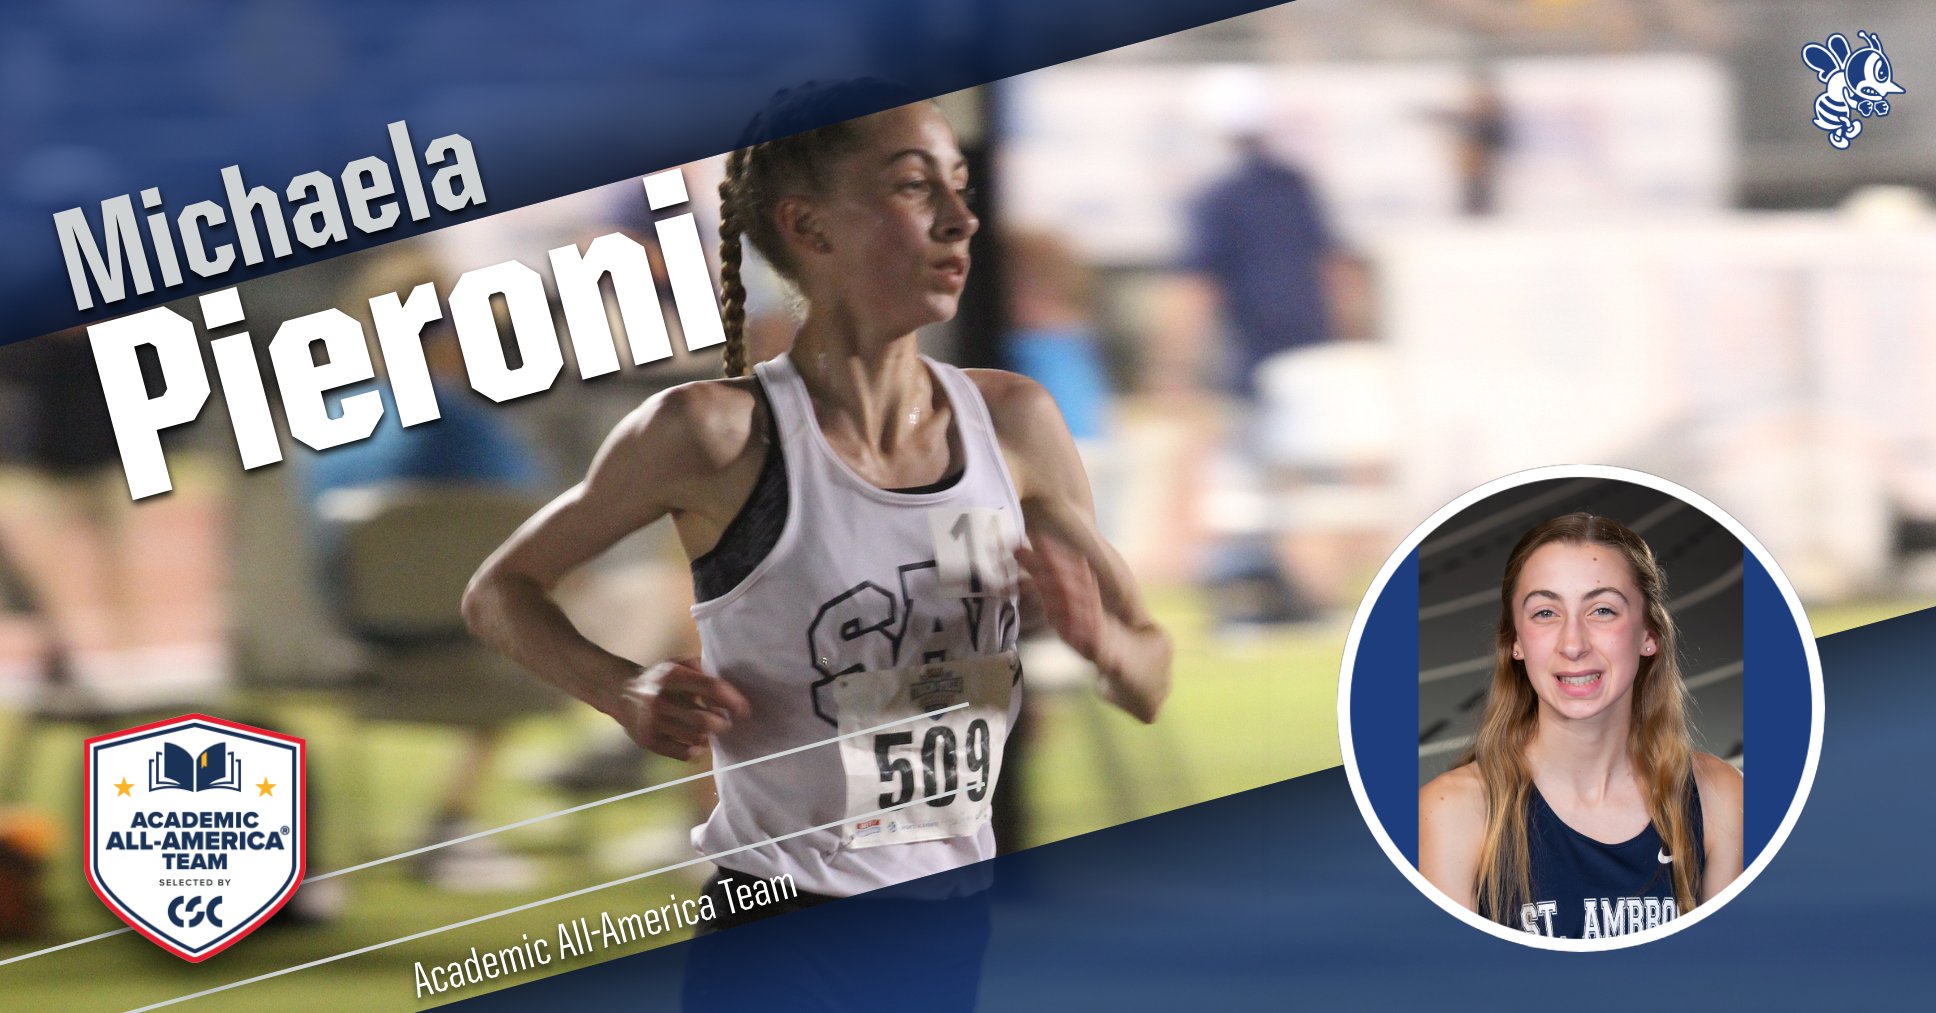 Pieroni named to CSC Academic All-America Team